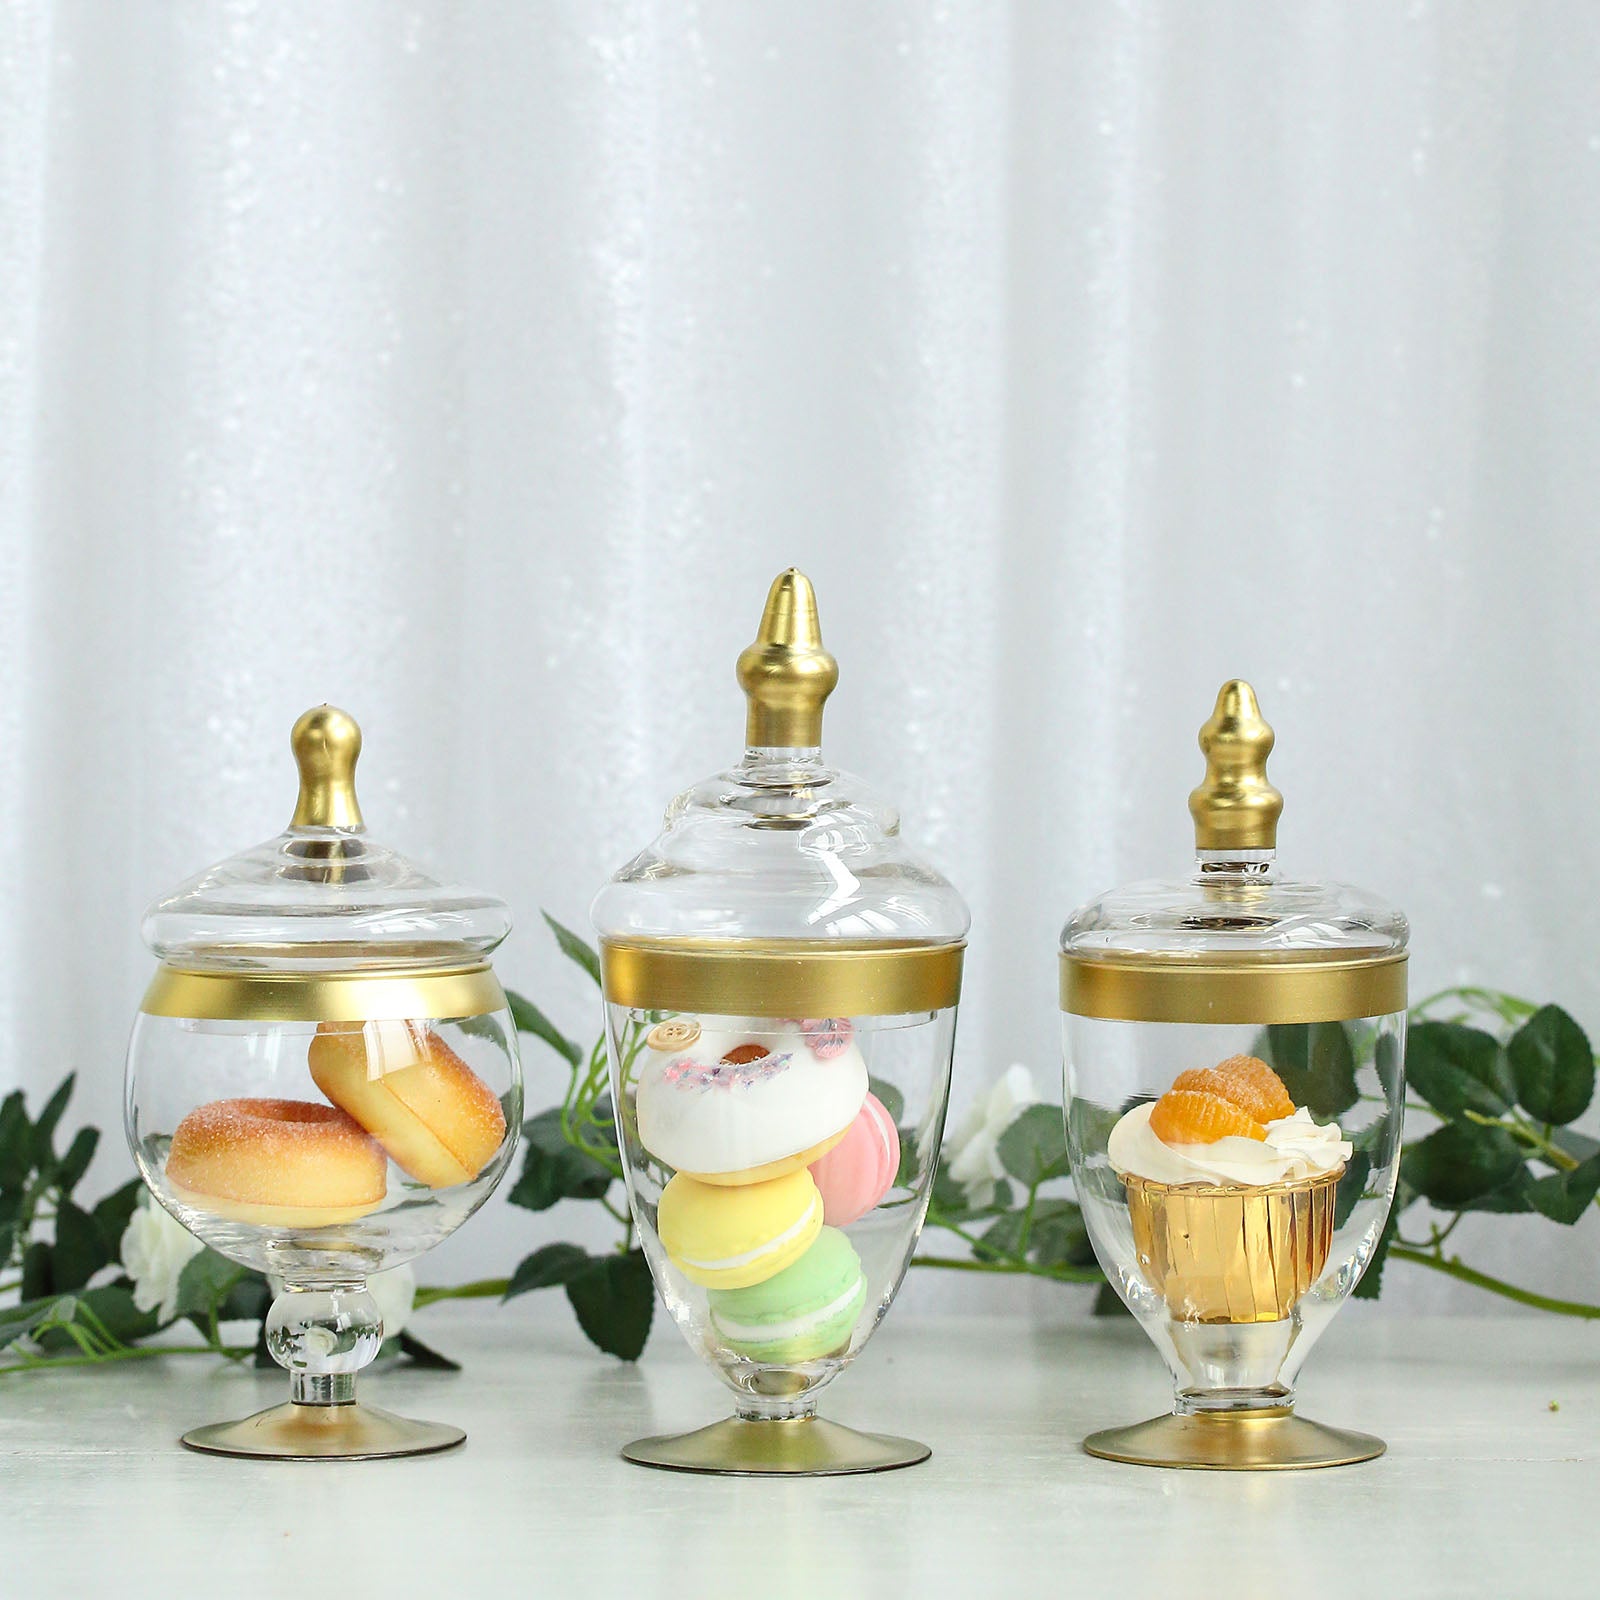 Set of 3 - Gold Trim Apothecary Jars, Glass Candy Jars With Lids - 9,9,8